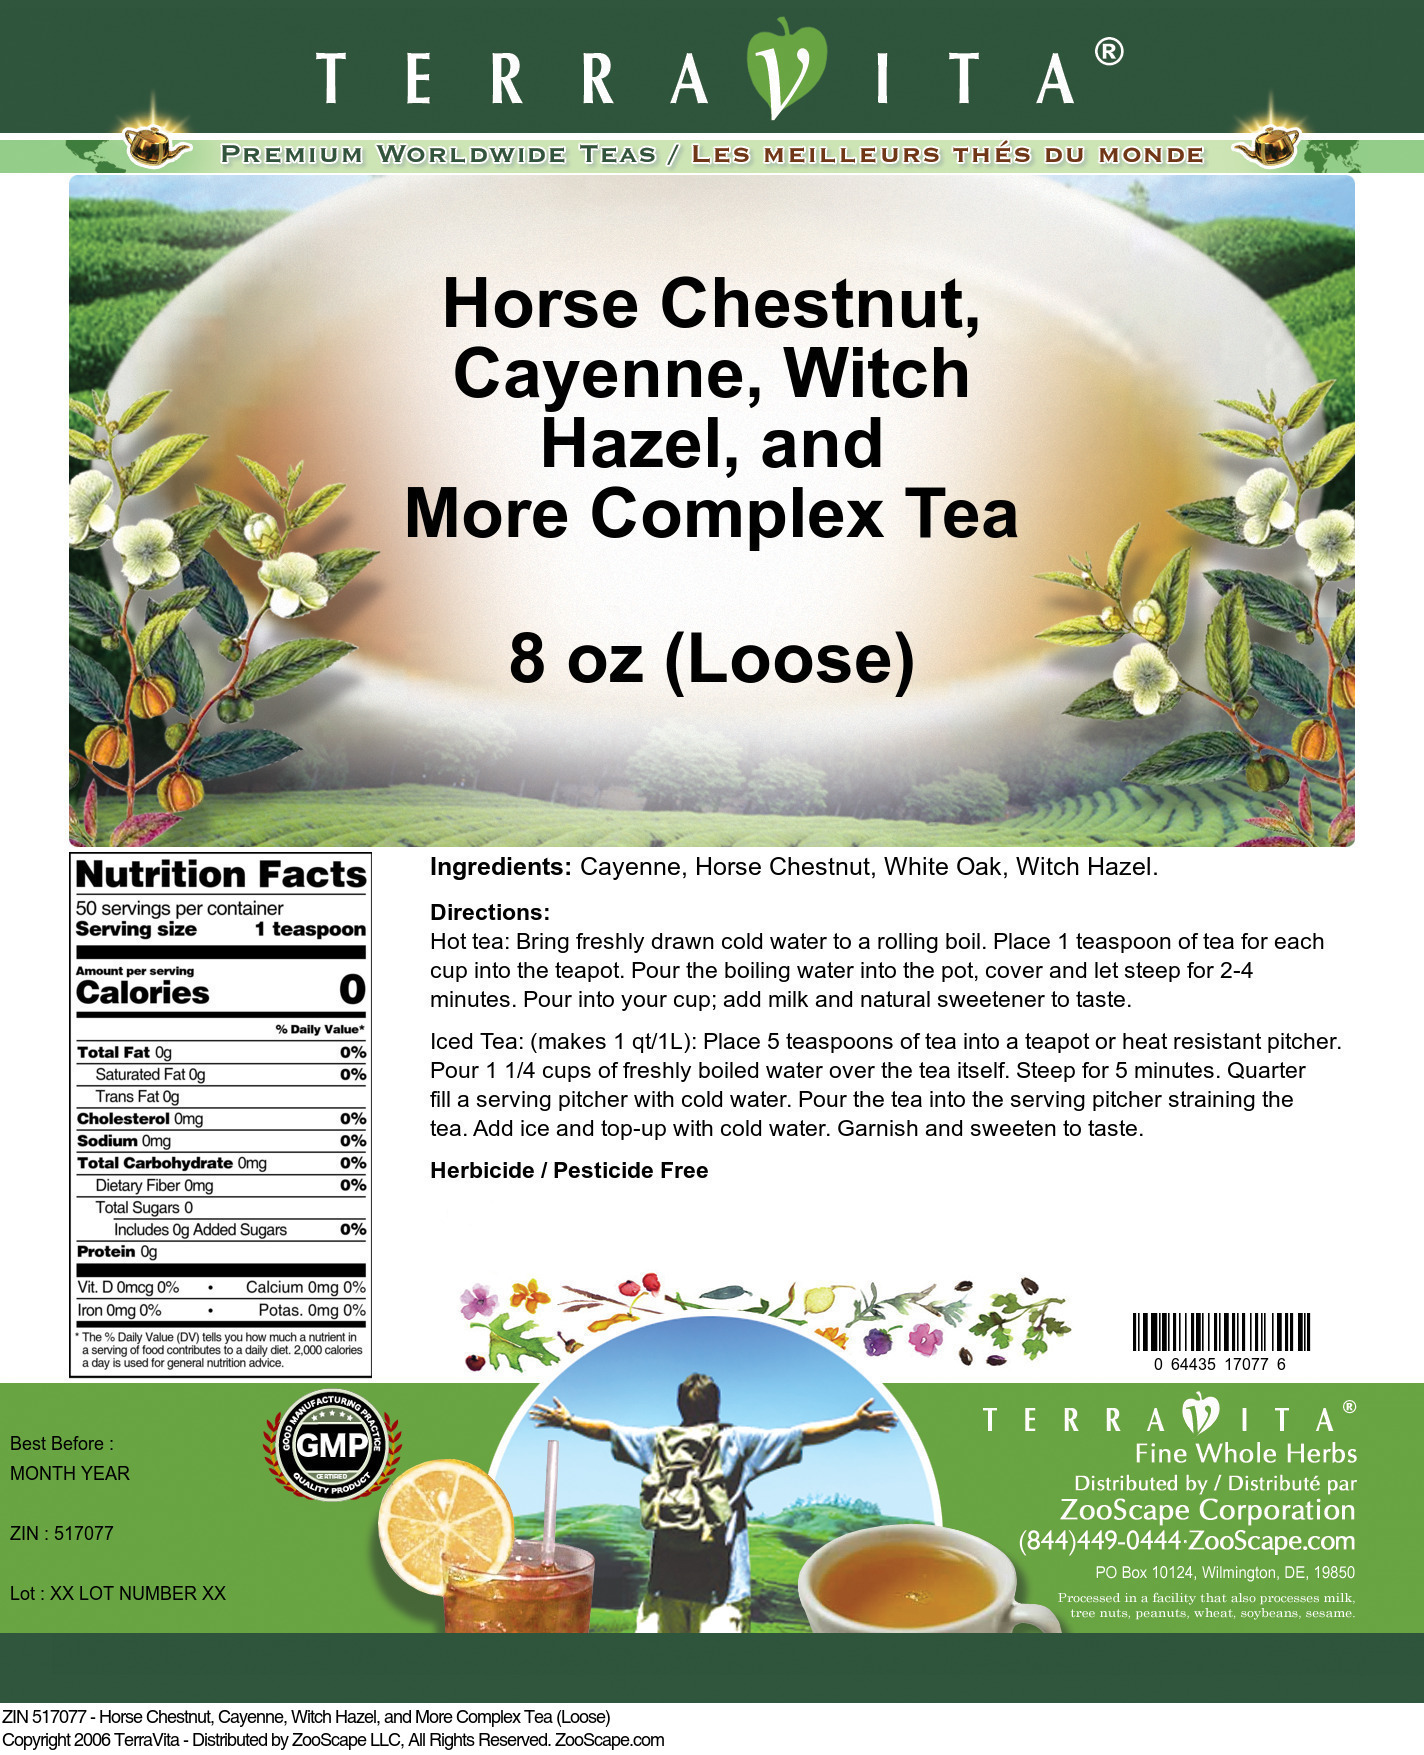 Horse Chestnut, Cayenne, Witch Hazel, and More Complex Tea (Loose) - Label